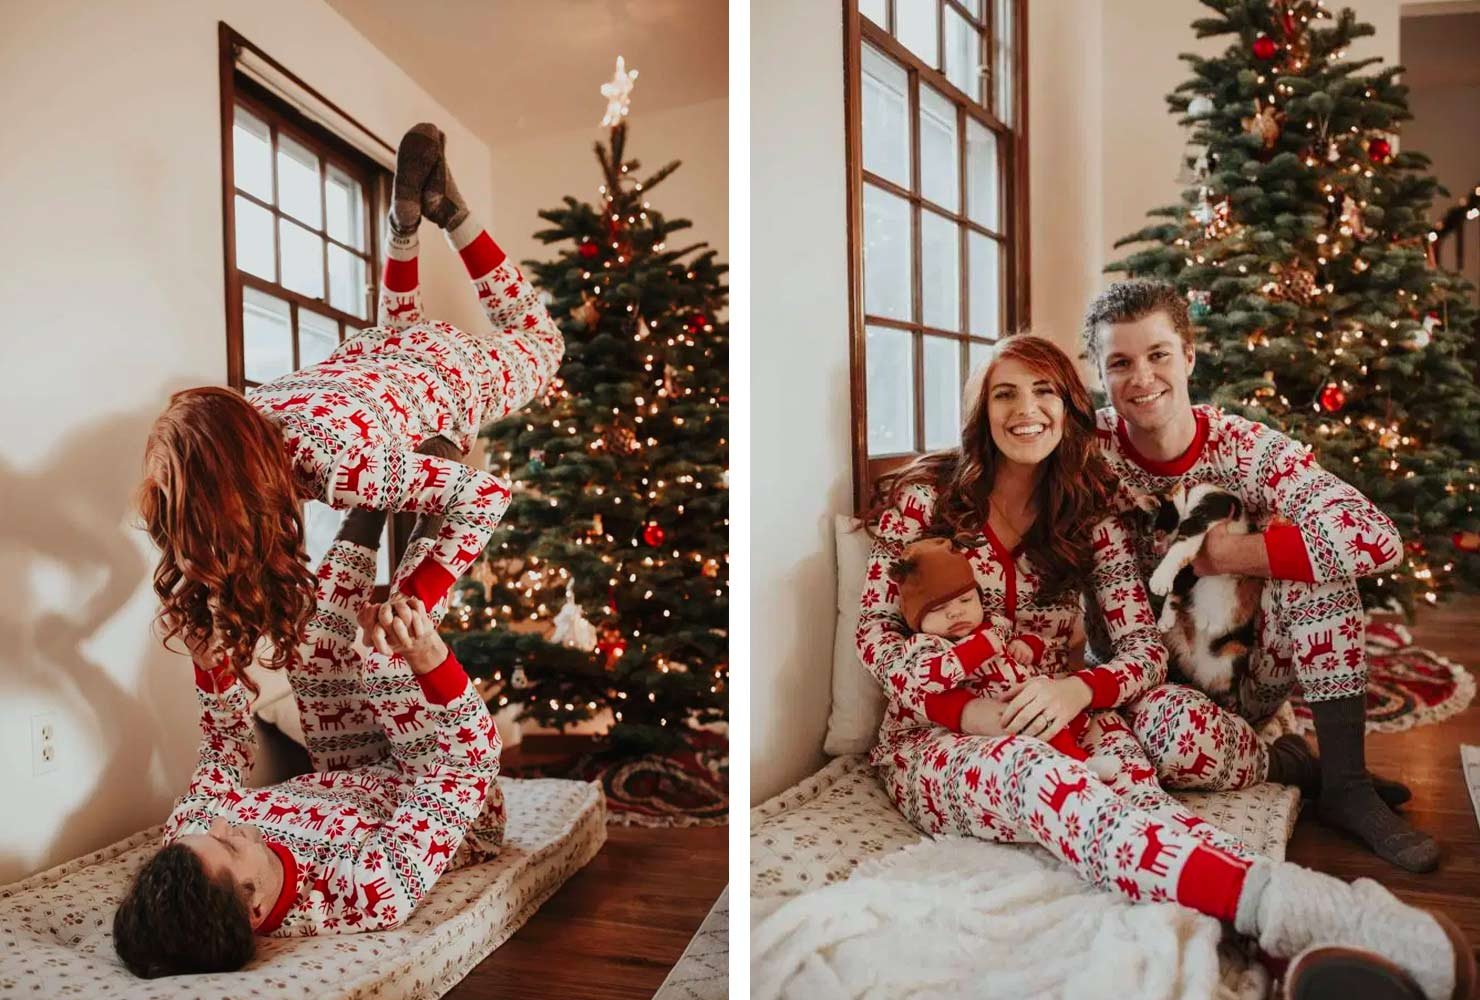 7 Best Christmas Baby Photoshoot Ideas for the Holiday Season